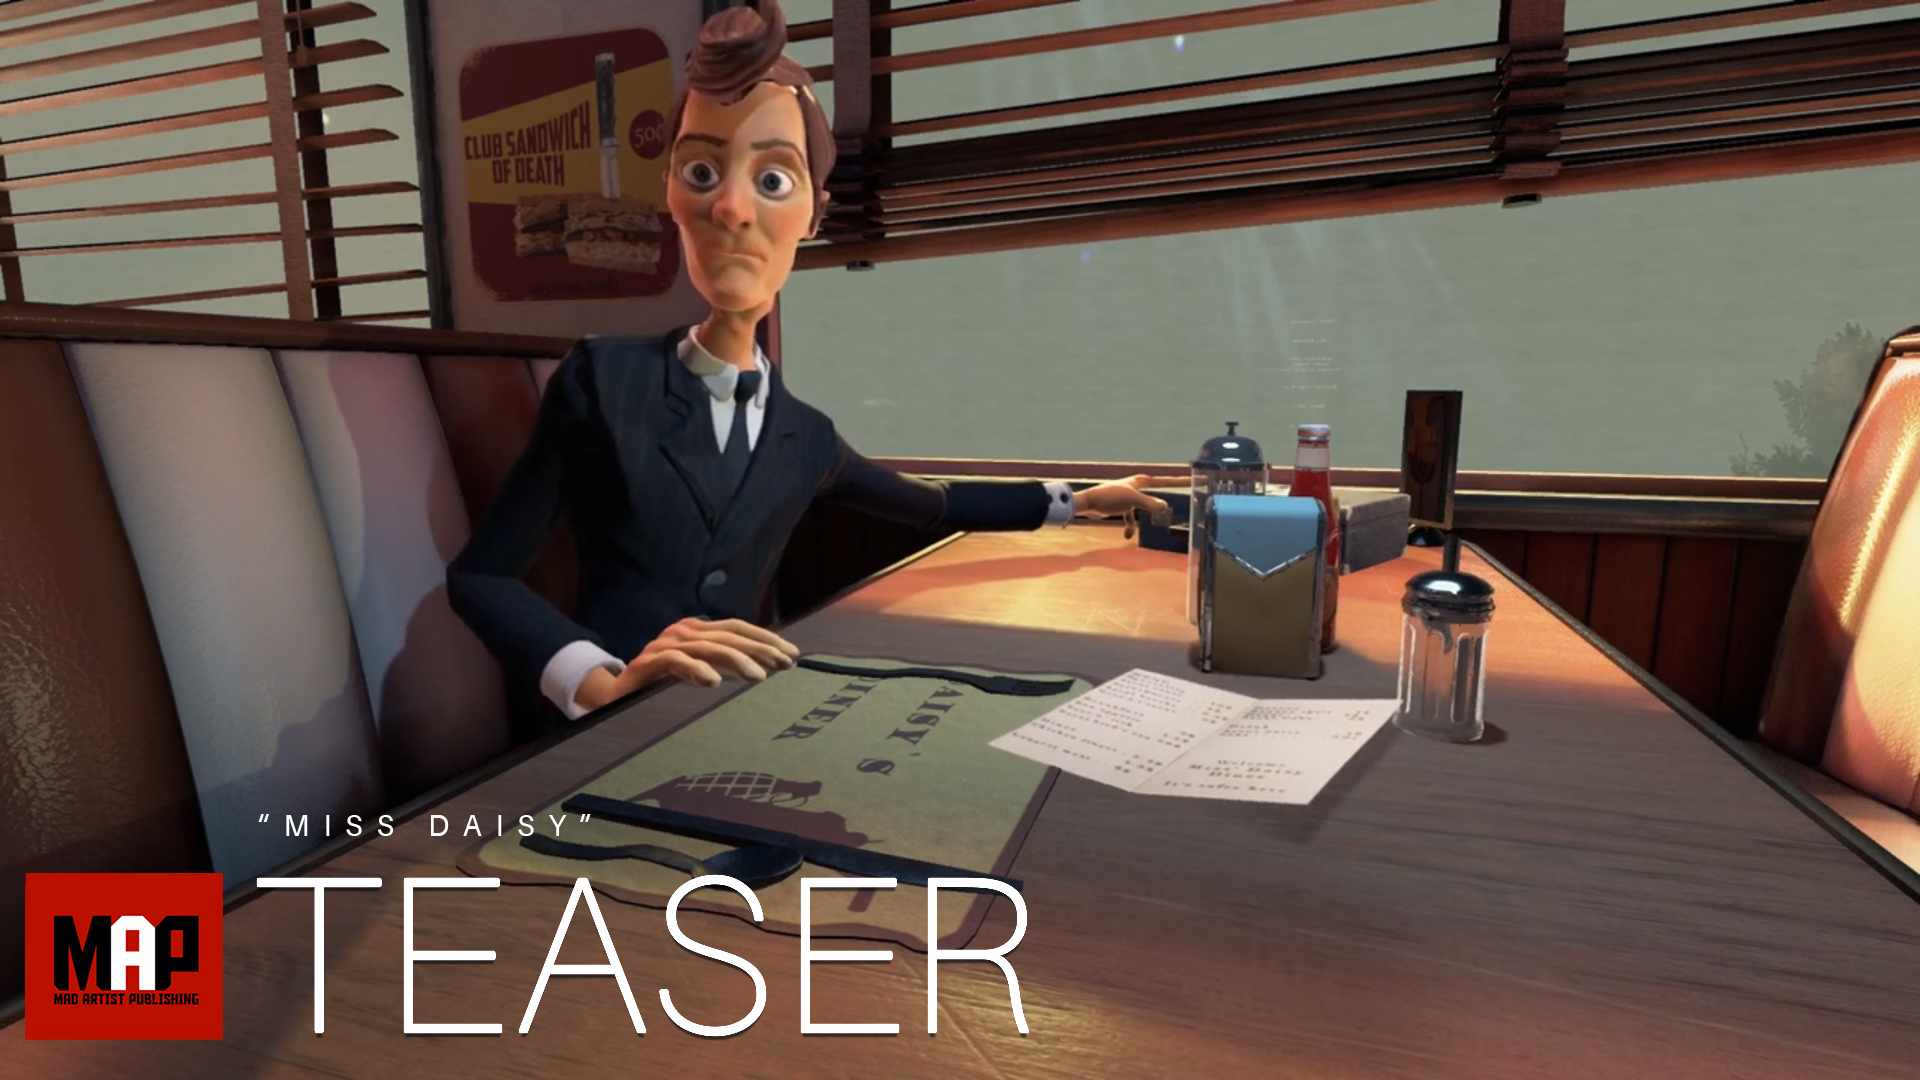 TRAILER | Funny CGI 3d Animated Short Film ** MISS DAISY ** Funny Action cg movie by NAD-UQAC